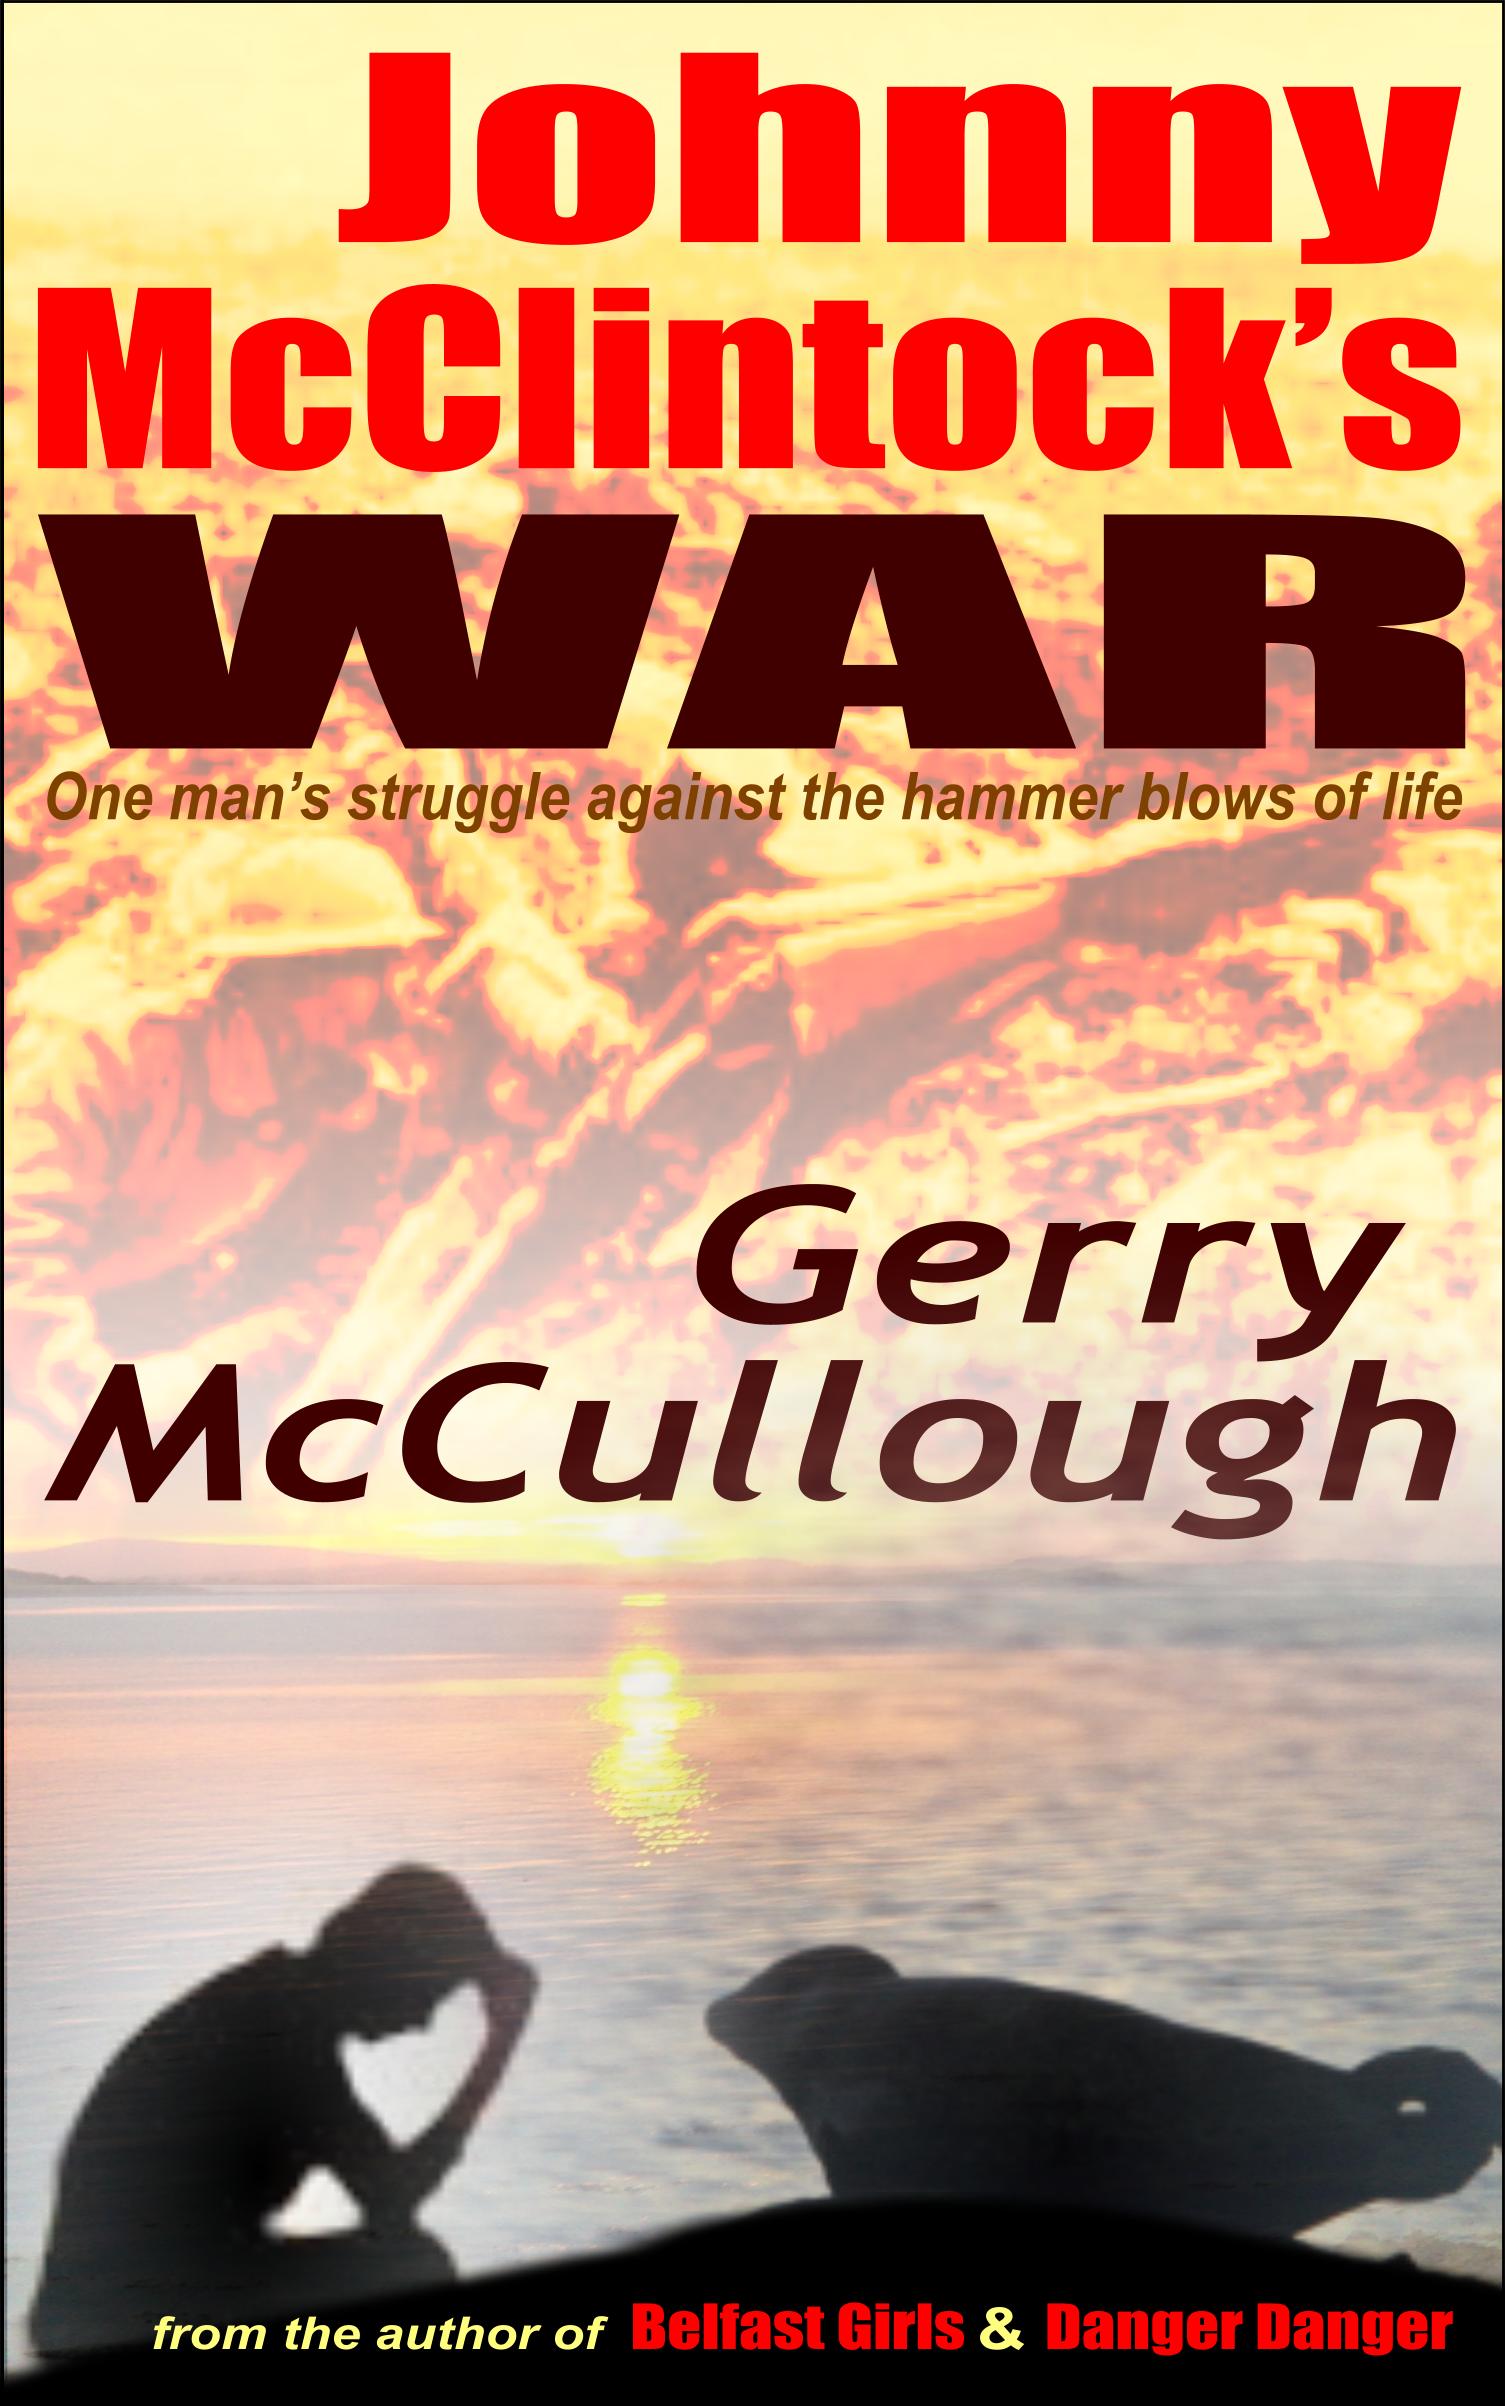 Buy Johnny McClintock's War from Amazon & other outlets